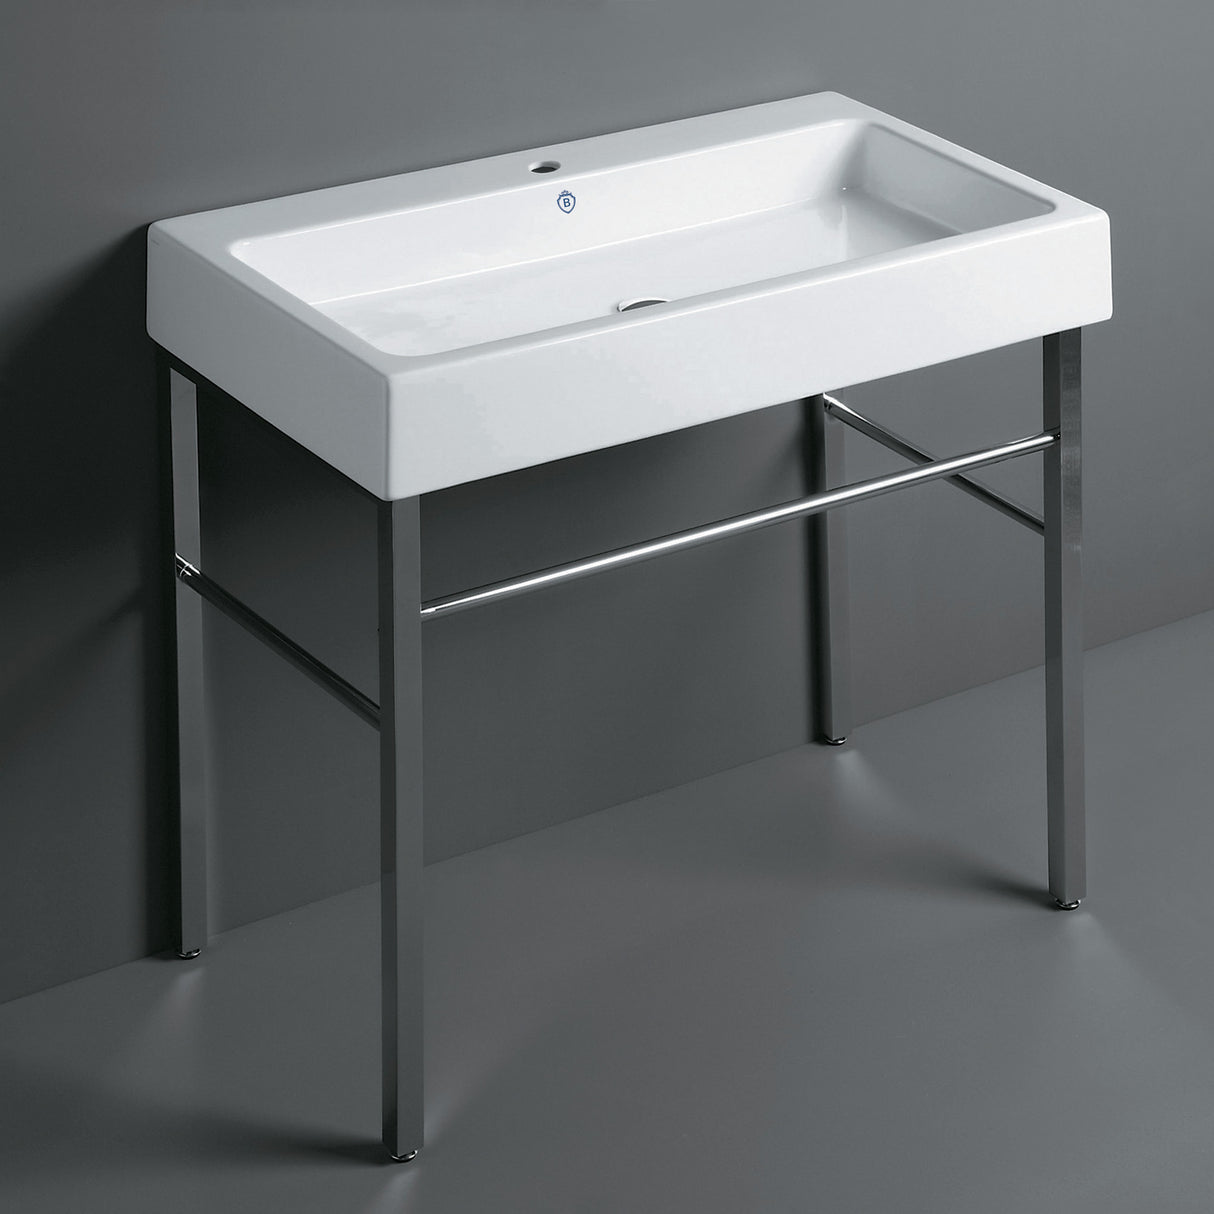 Britannia Large Rectangular Sink Console with Front Towel Bar and Single Faucet Hole Drill